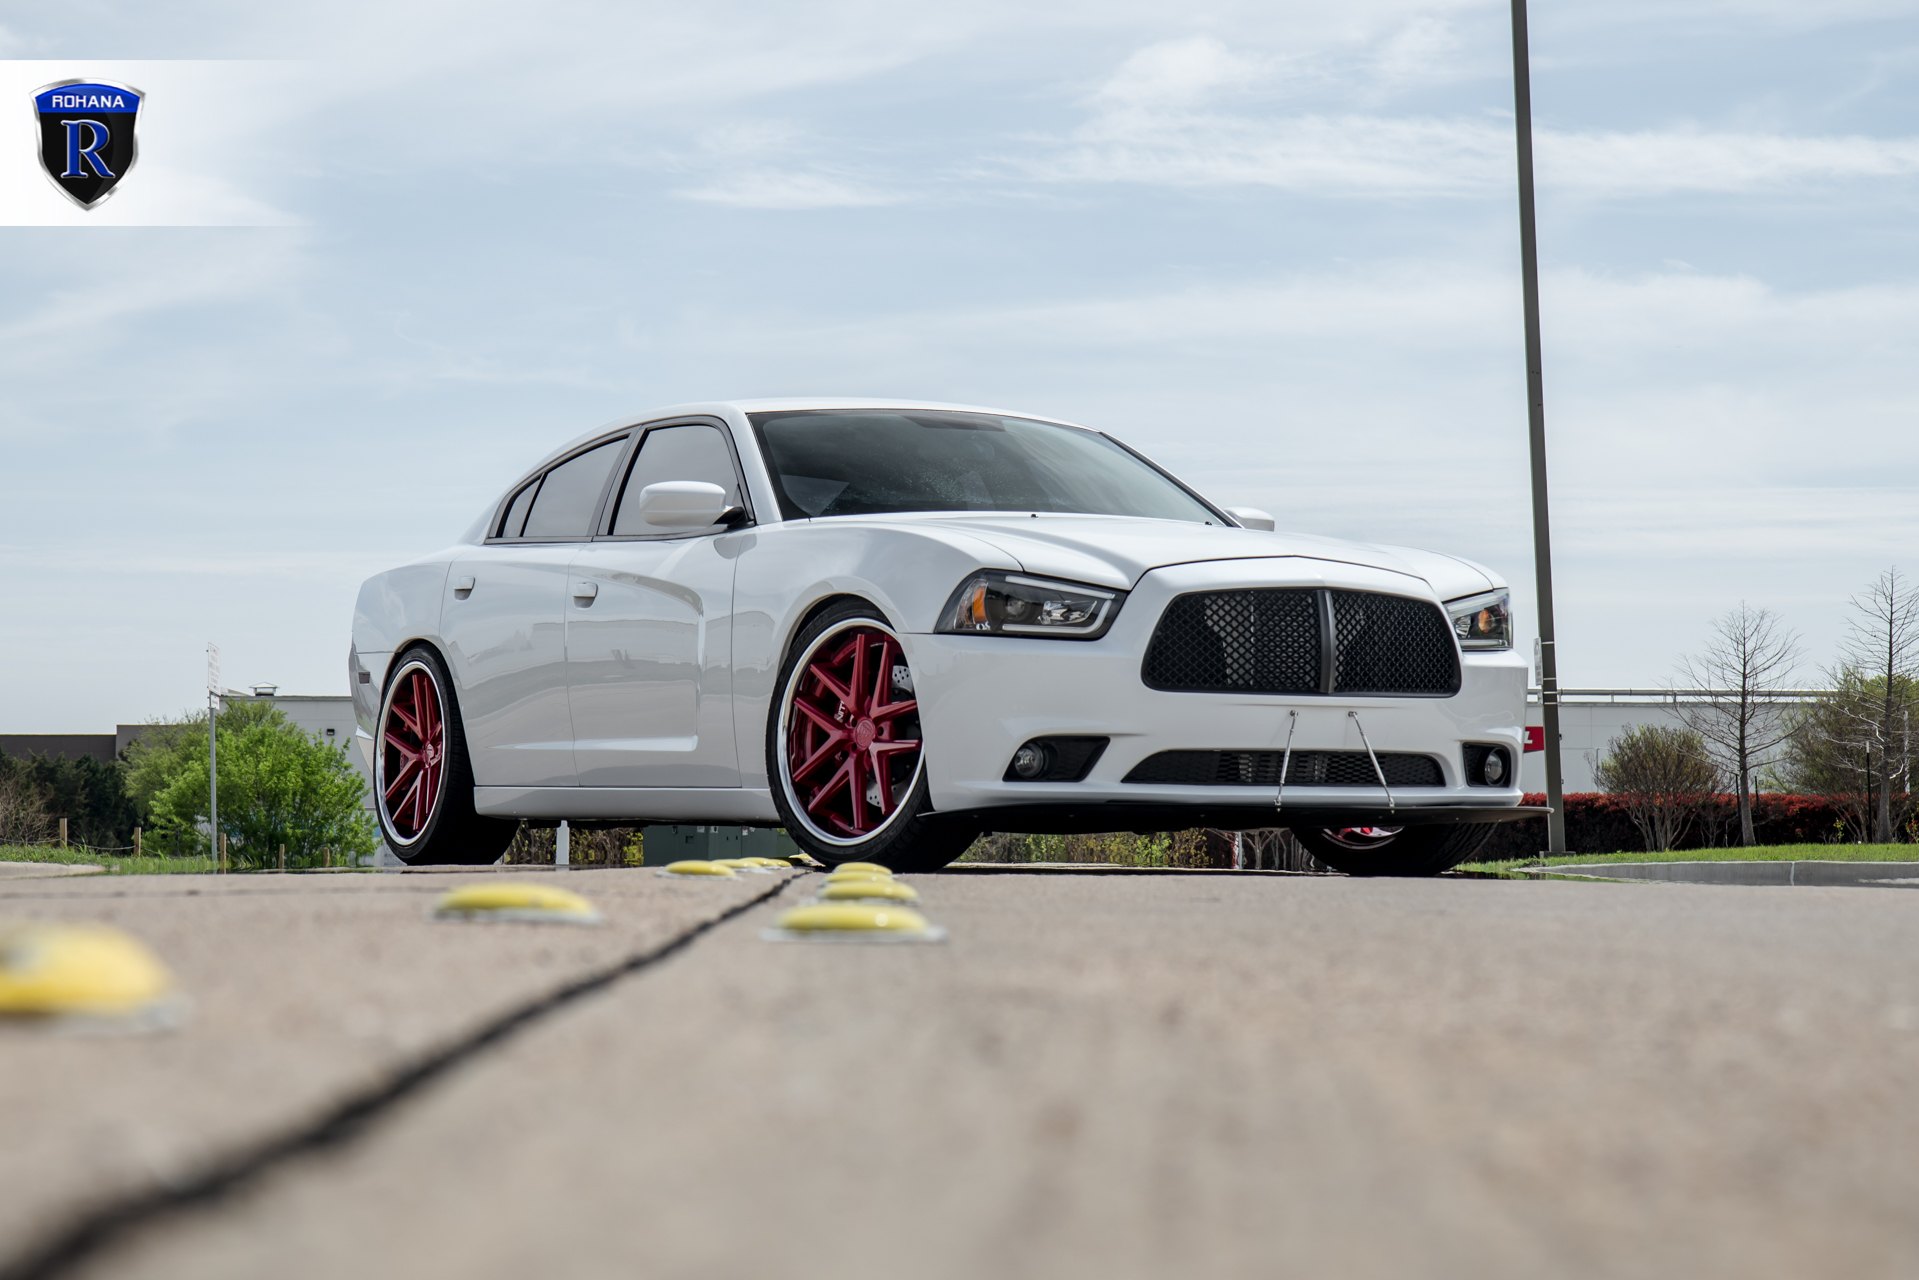 Blacked Out Mesh Grille on White Dodge Charger - Photo by Rohana Wheels